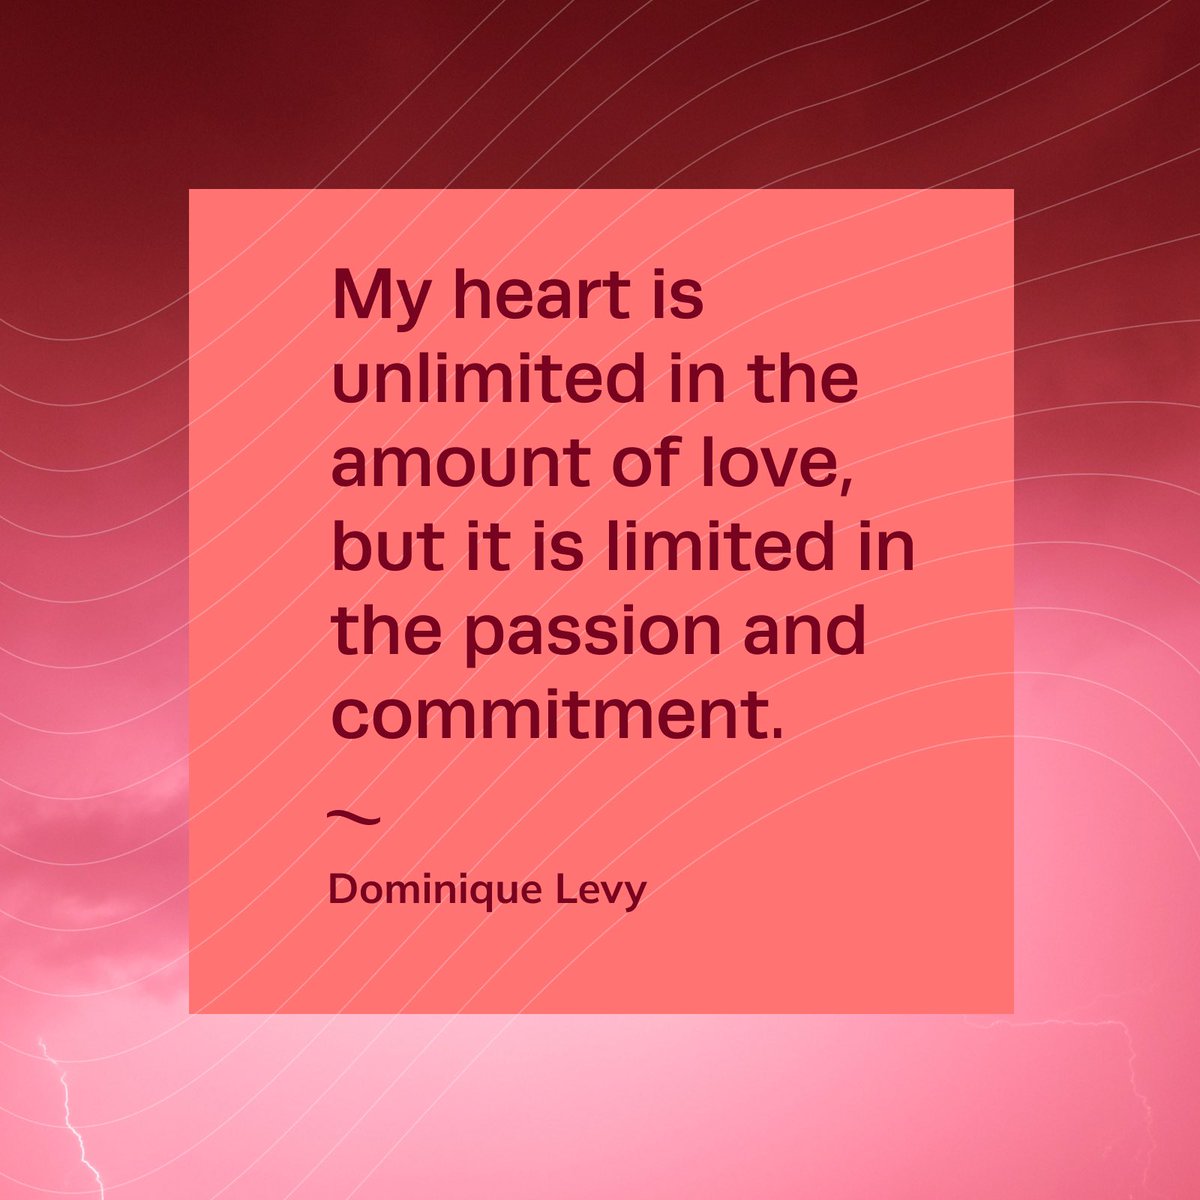 Swiss art dealer #DominiqueLevy makes a distinction between love & devotion,suggesting that in work, as in life, there is no limit to love, but passion can be finite. This reminds us to recognize our boundaries so that we can give our commitments our full attention & dedication.